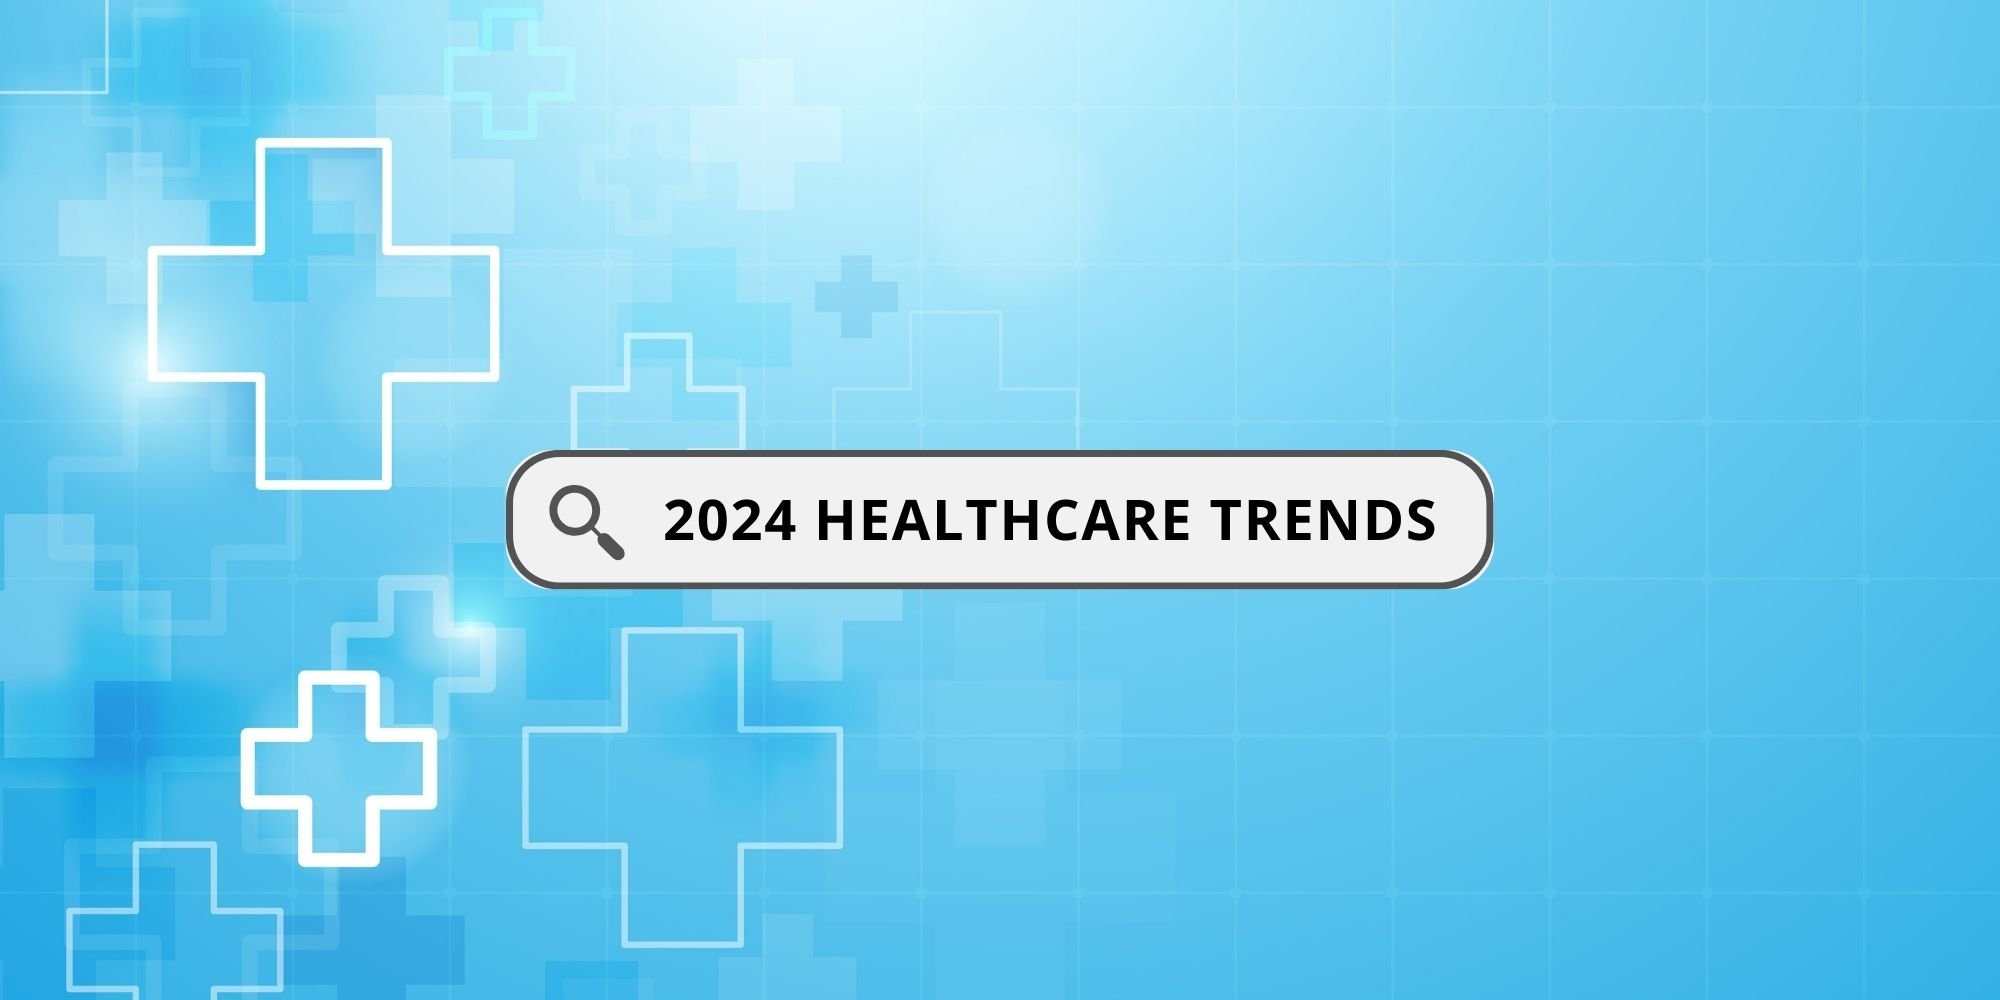 https://medicushcs.com/resources/2024-healthcare-trends-insights-for-physicians-and-advanced-practitioners